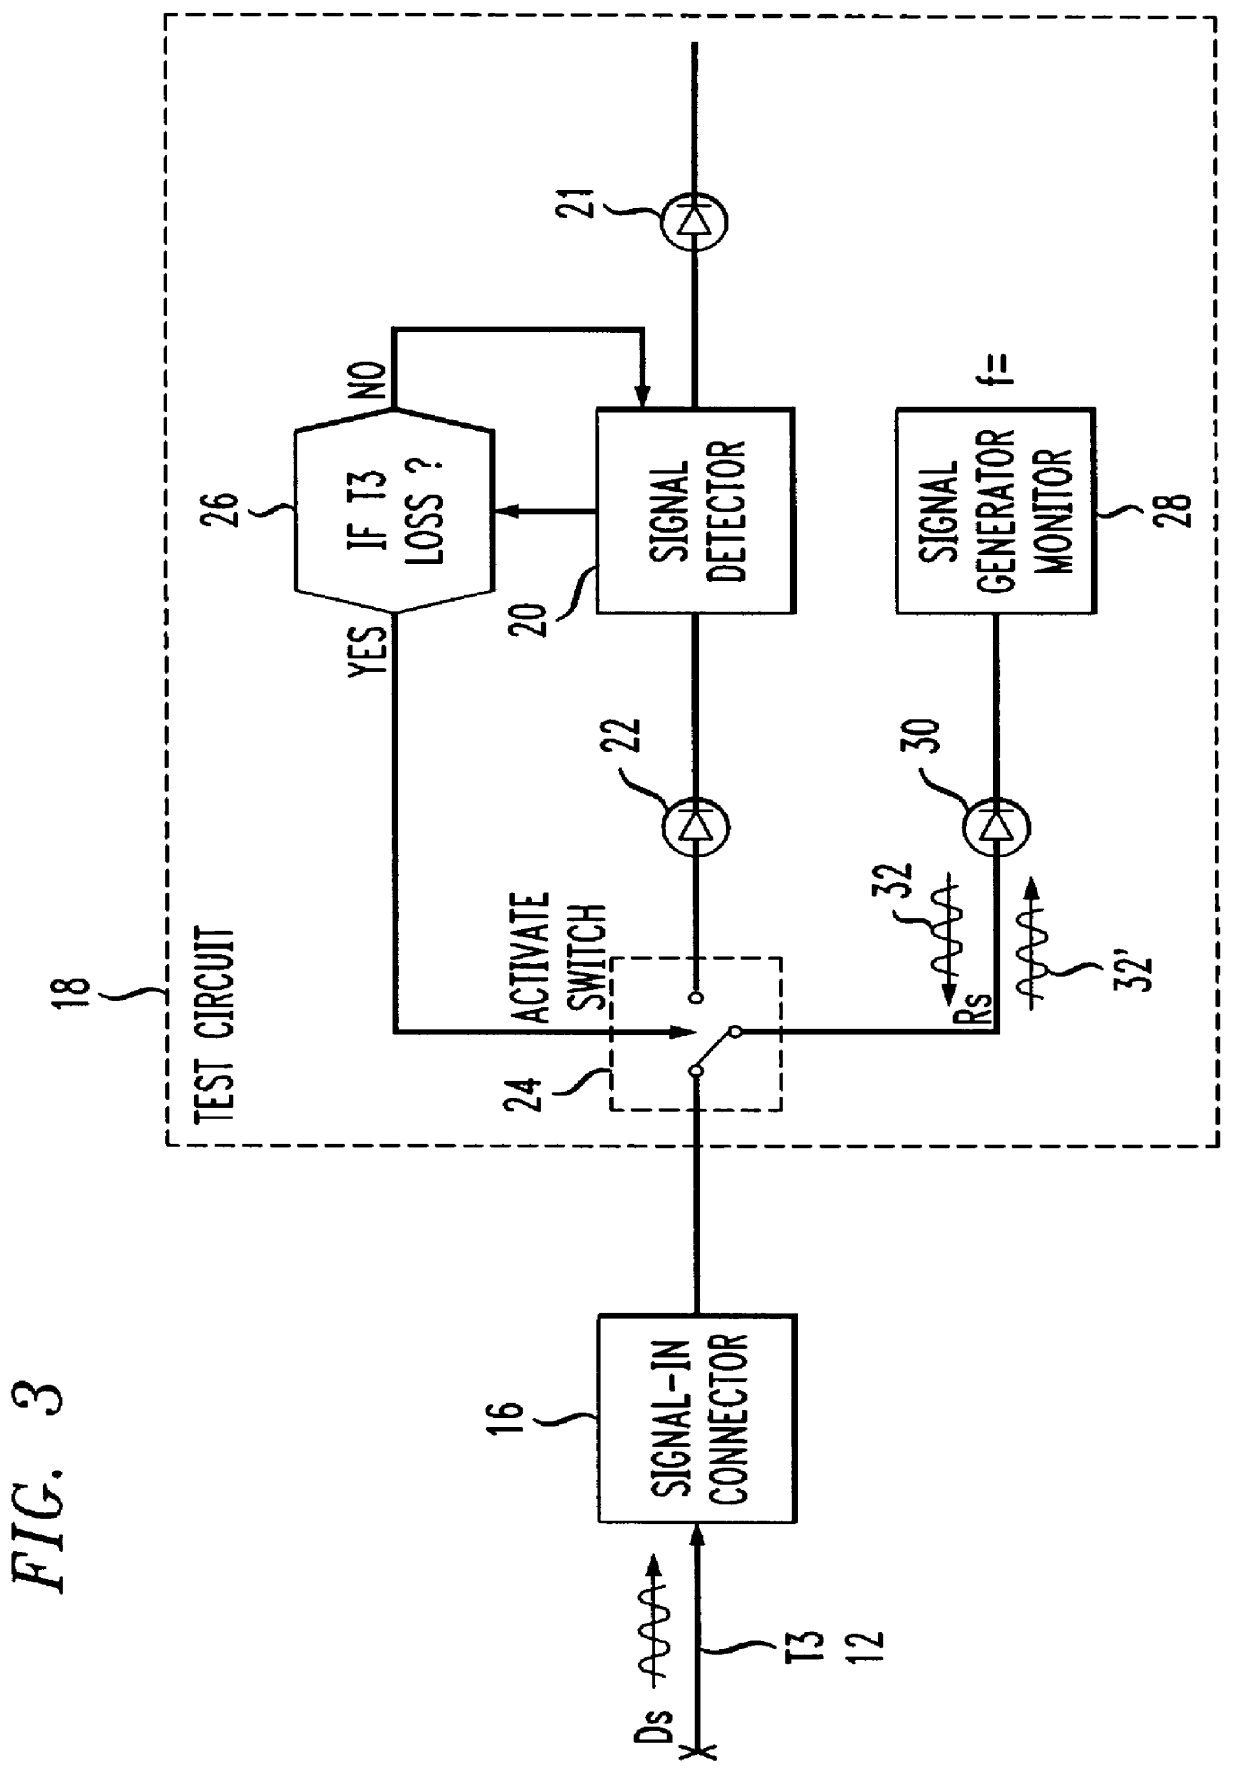 Methods and apparatus for detecting and locating cable failure in communication systems